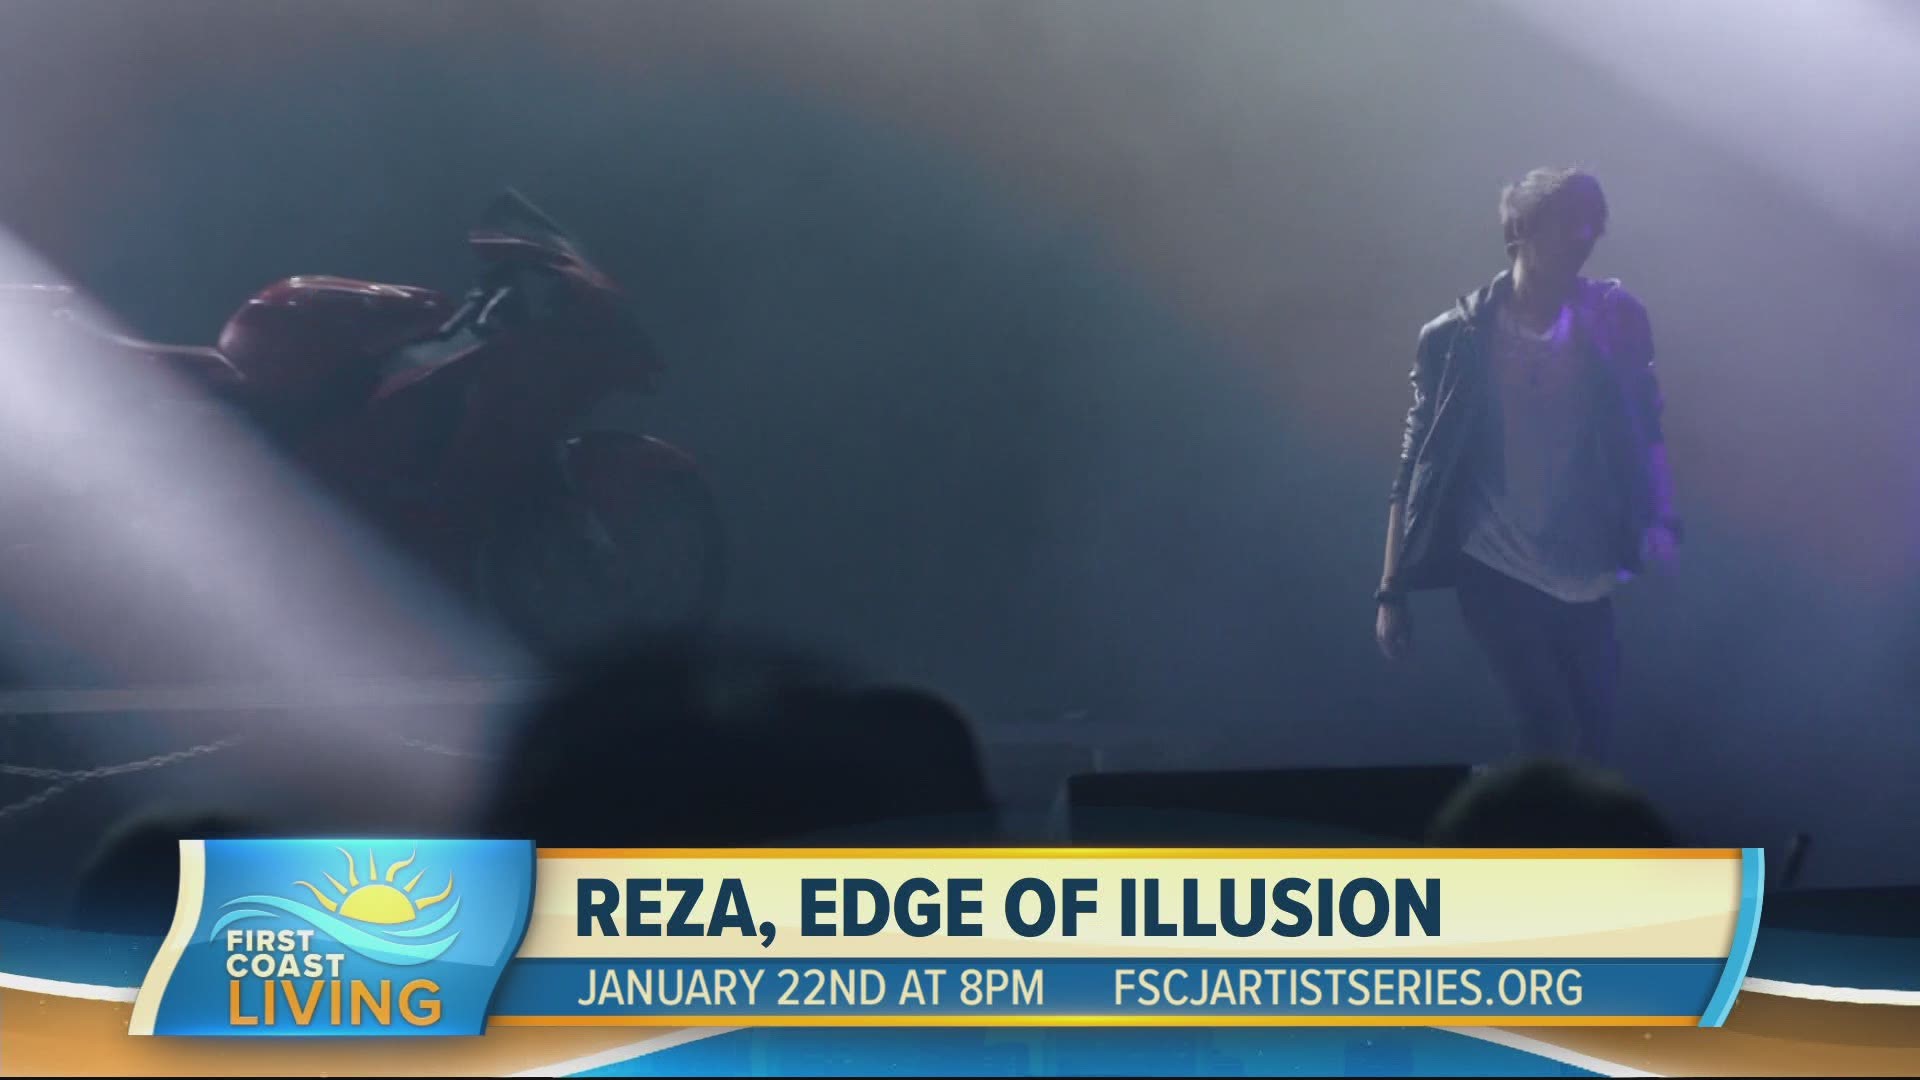 Reza takes the art of illusion to a new level, delivering a rock concert style magic show to audiences.